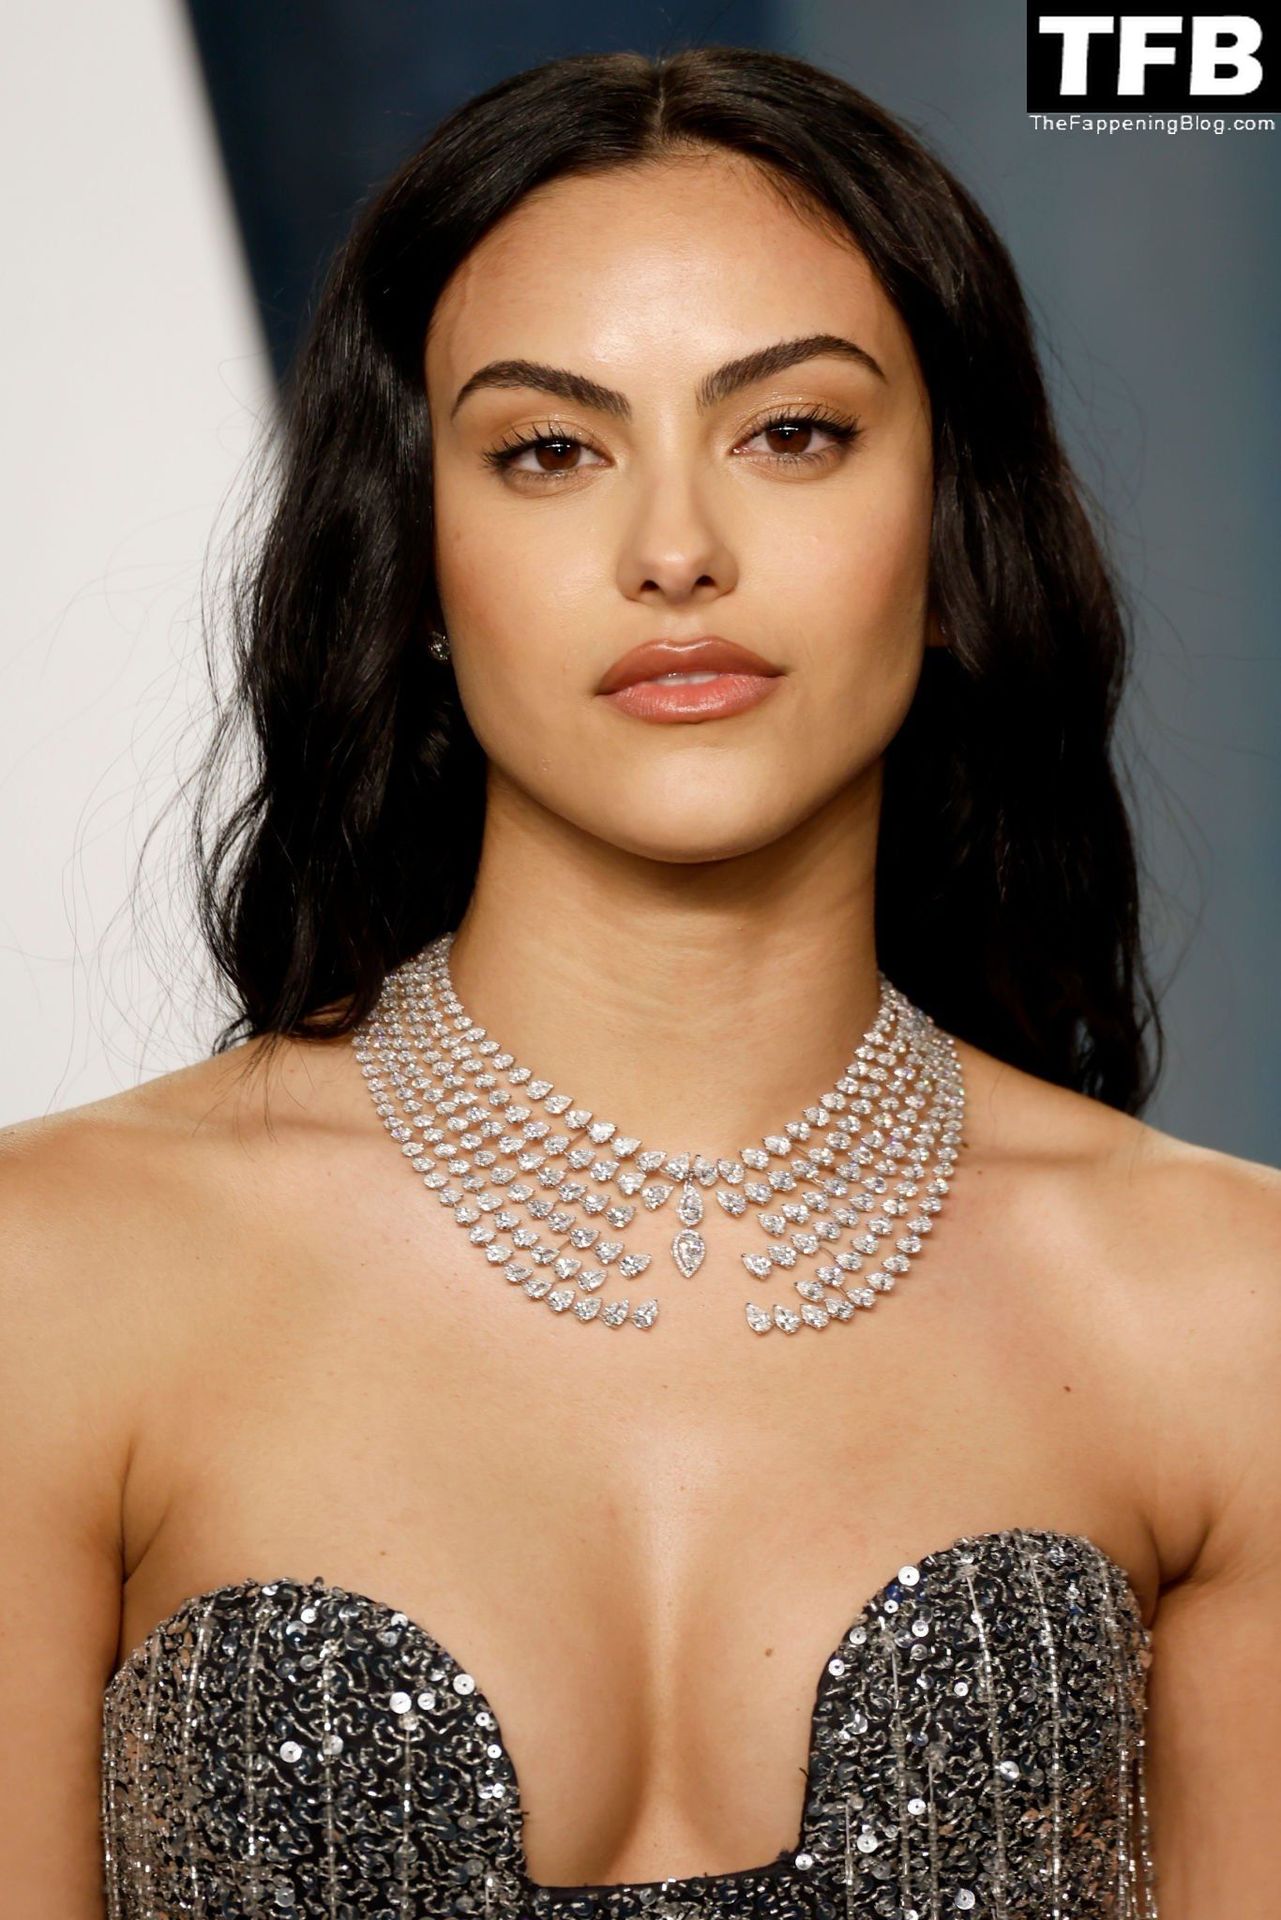 Camila-Mendes-Sexy-The-Fappening-Blog-15.jpg